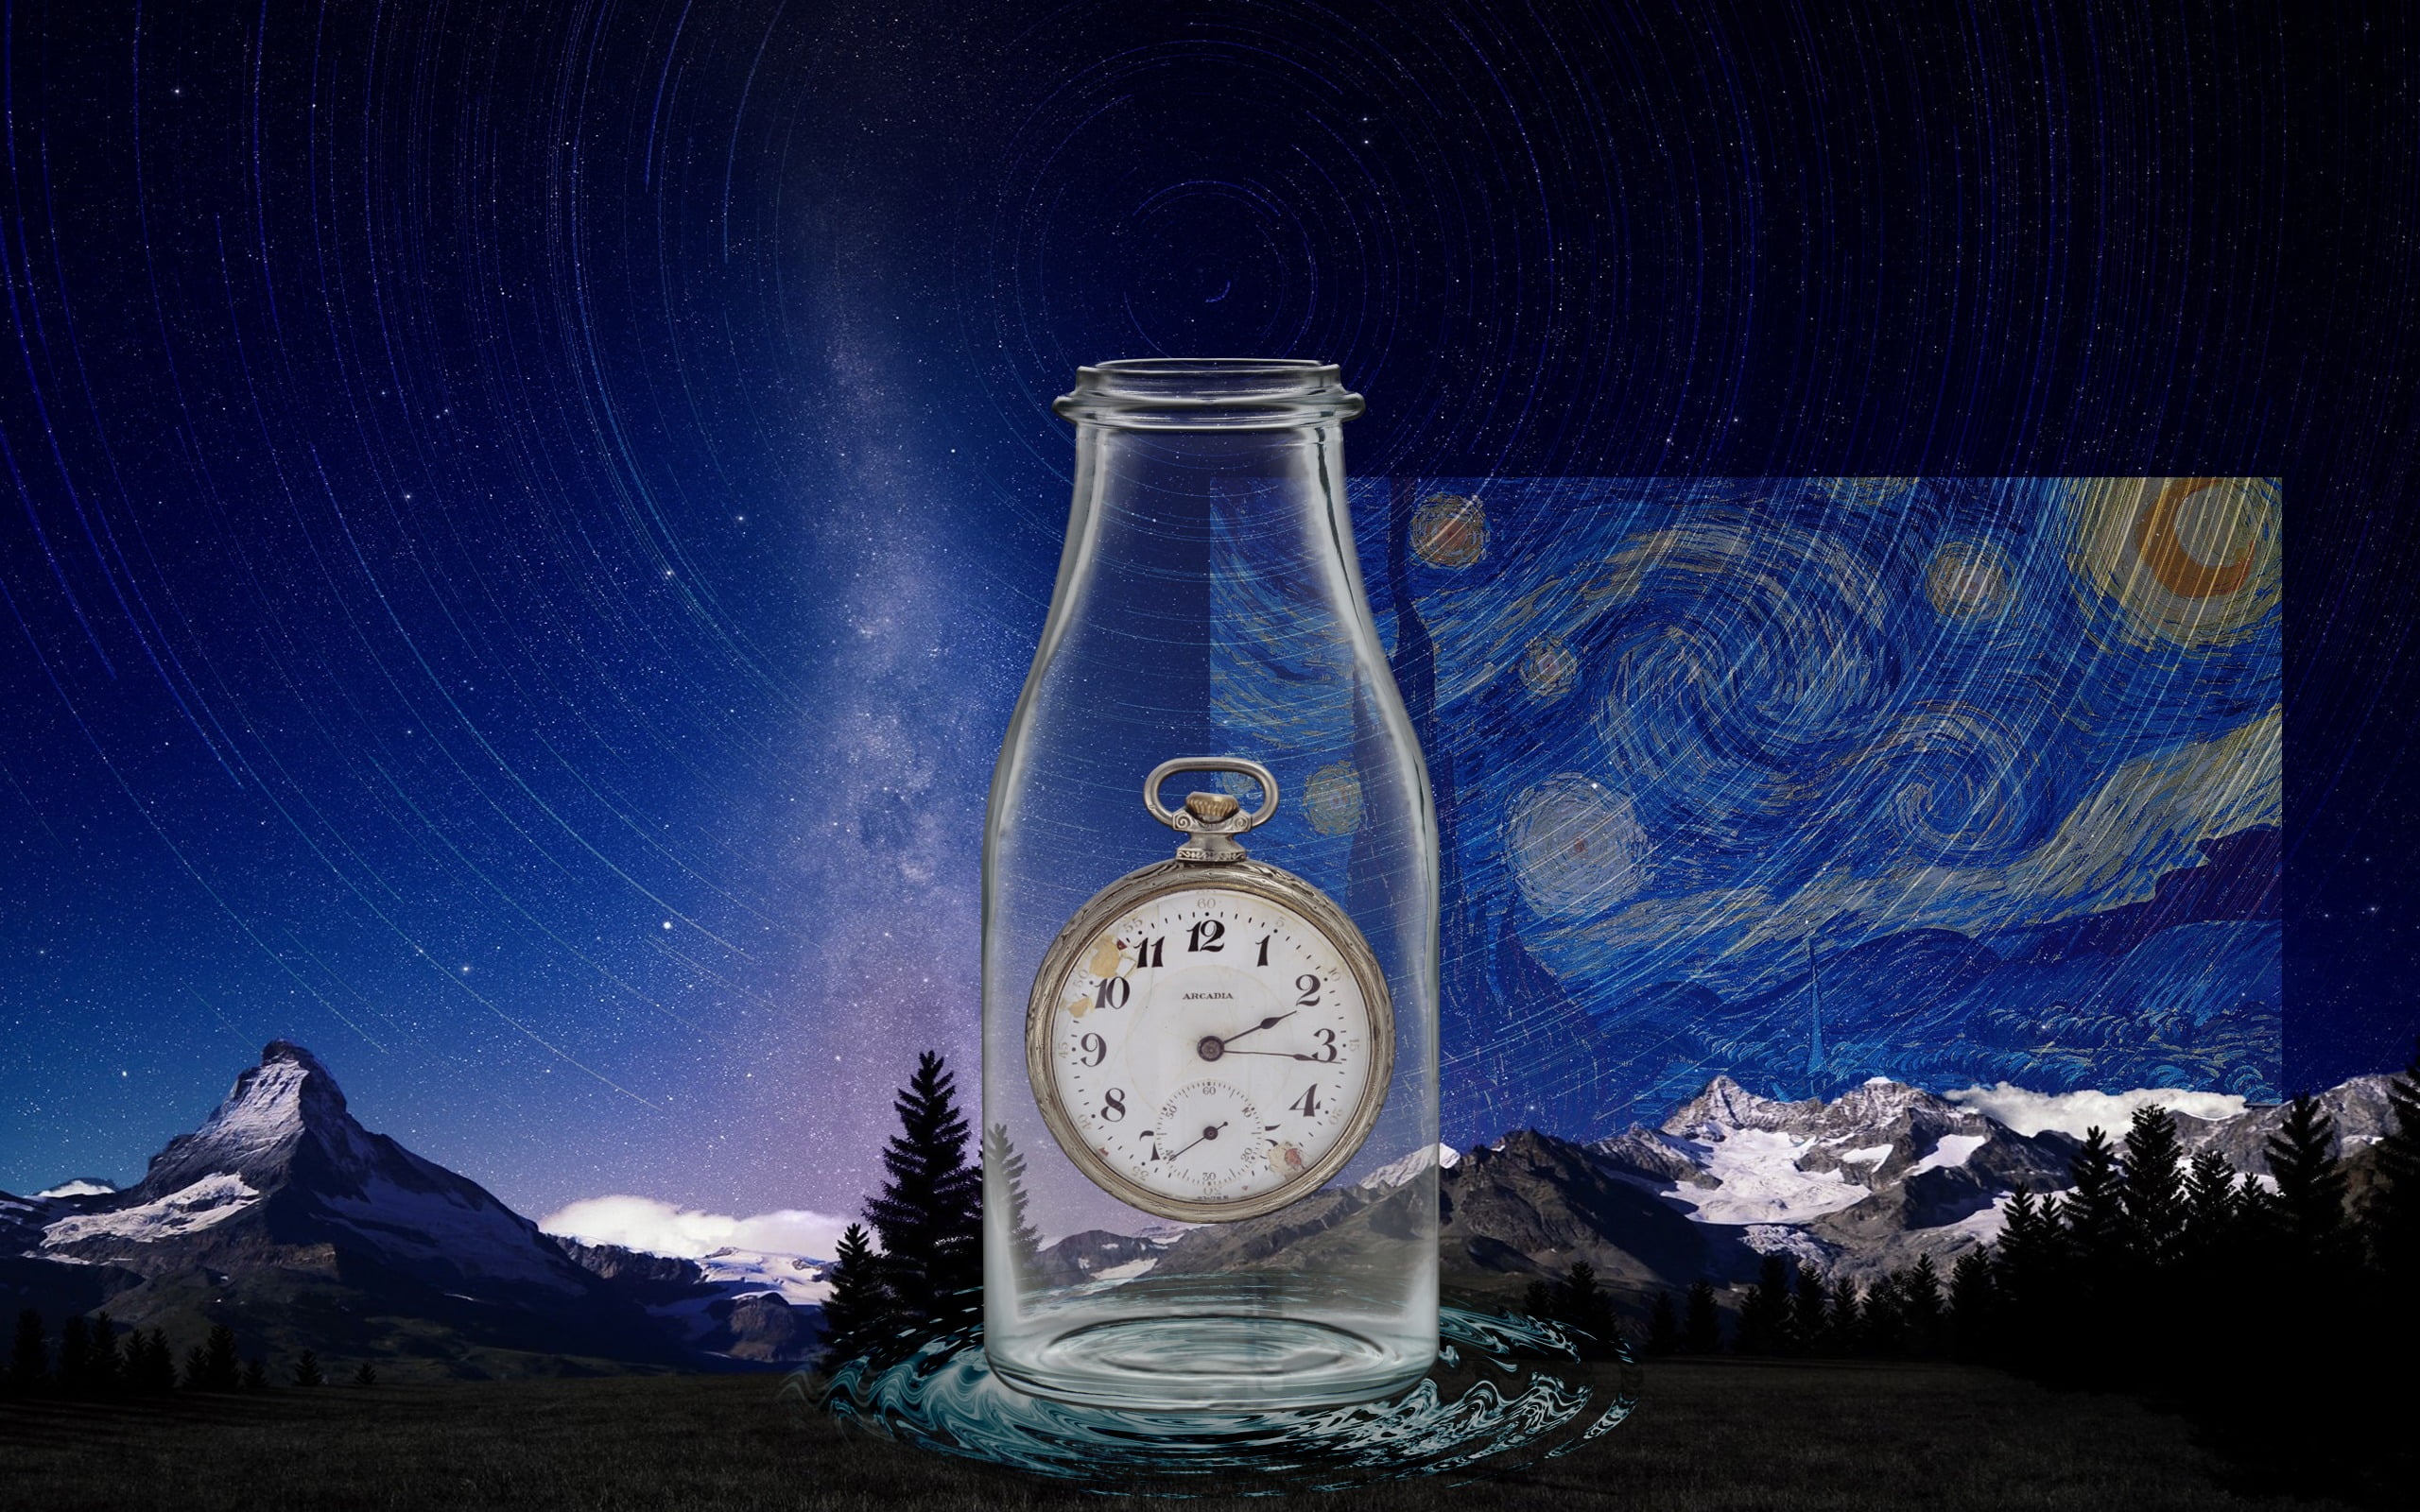 Vincent van Gogh, time in a bottle, pocketwatches, clock, star - space